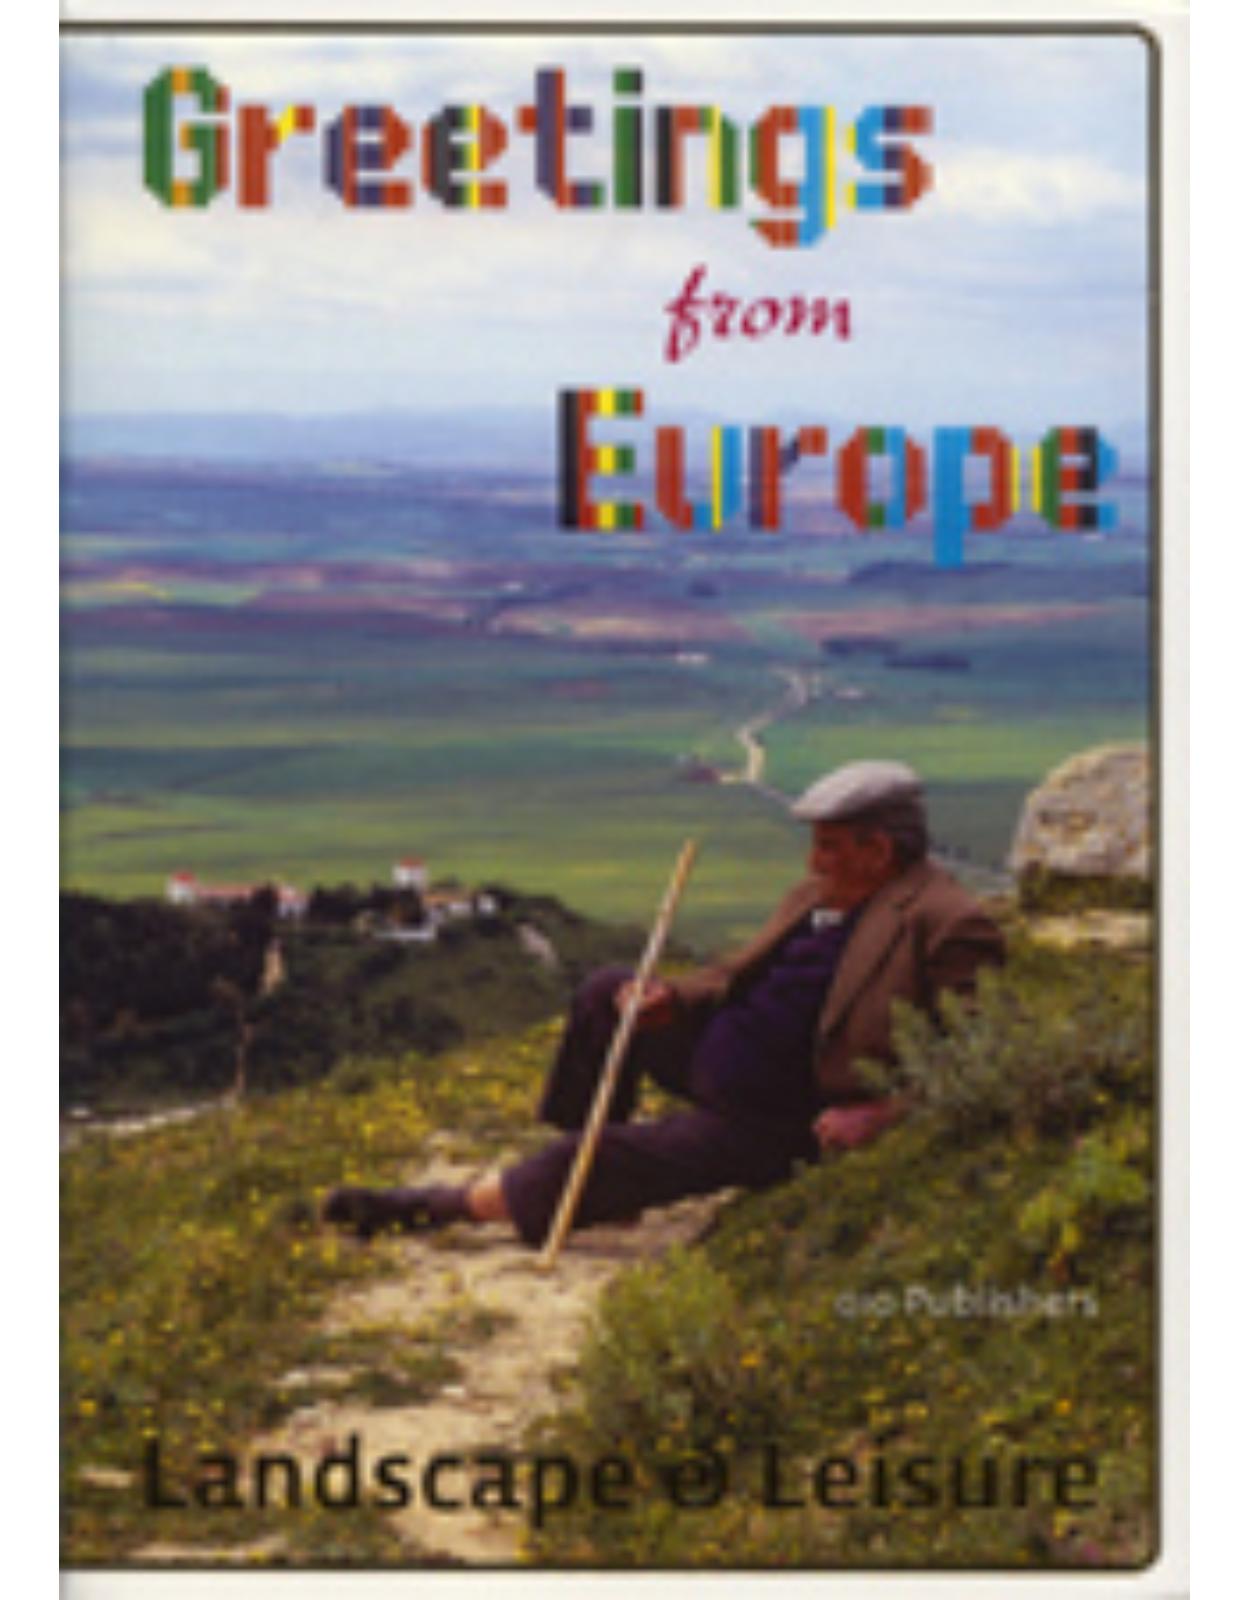 Greetings from Europe: Landscape and Leisure